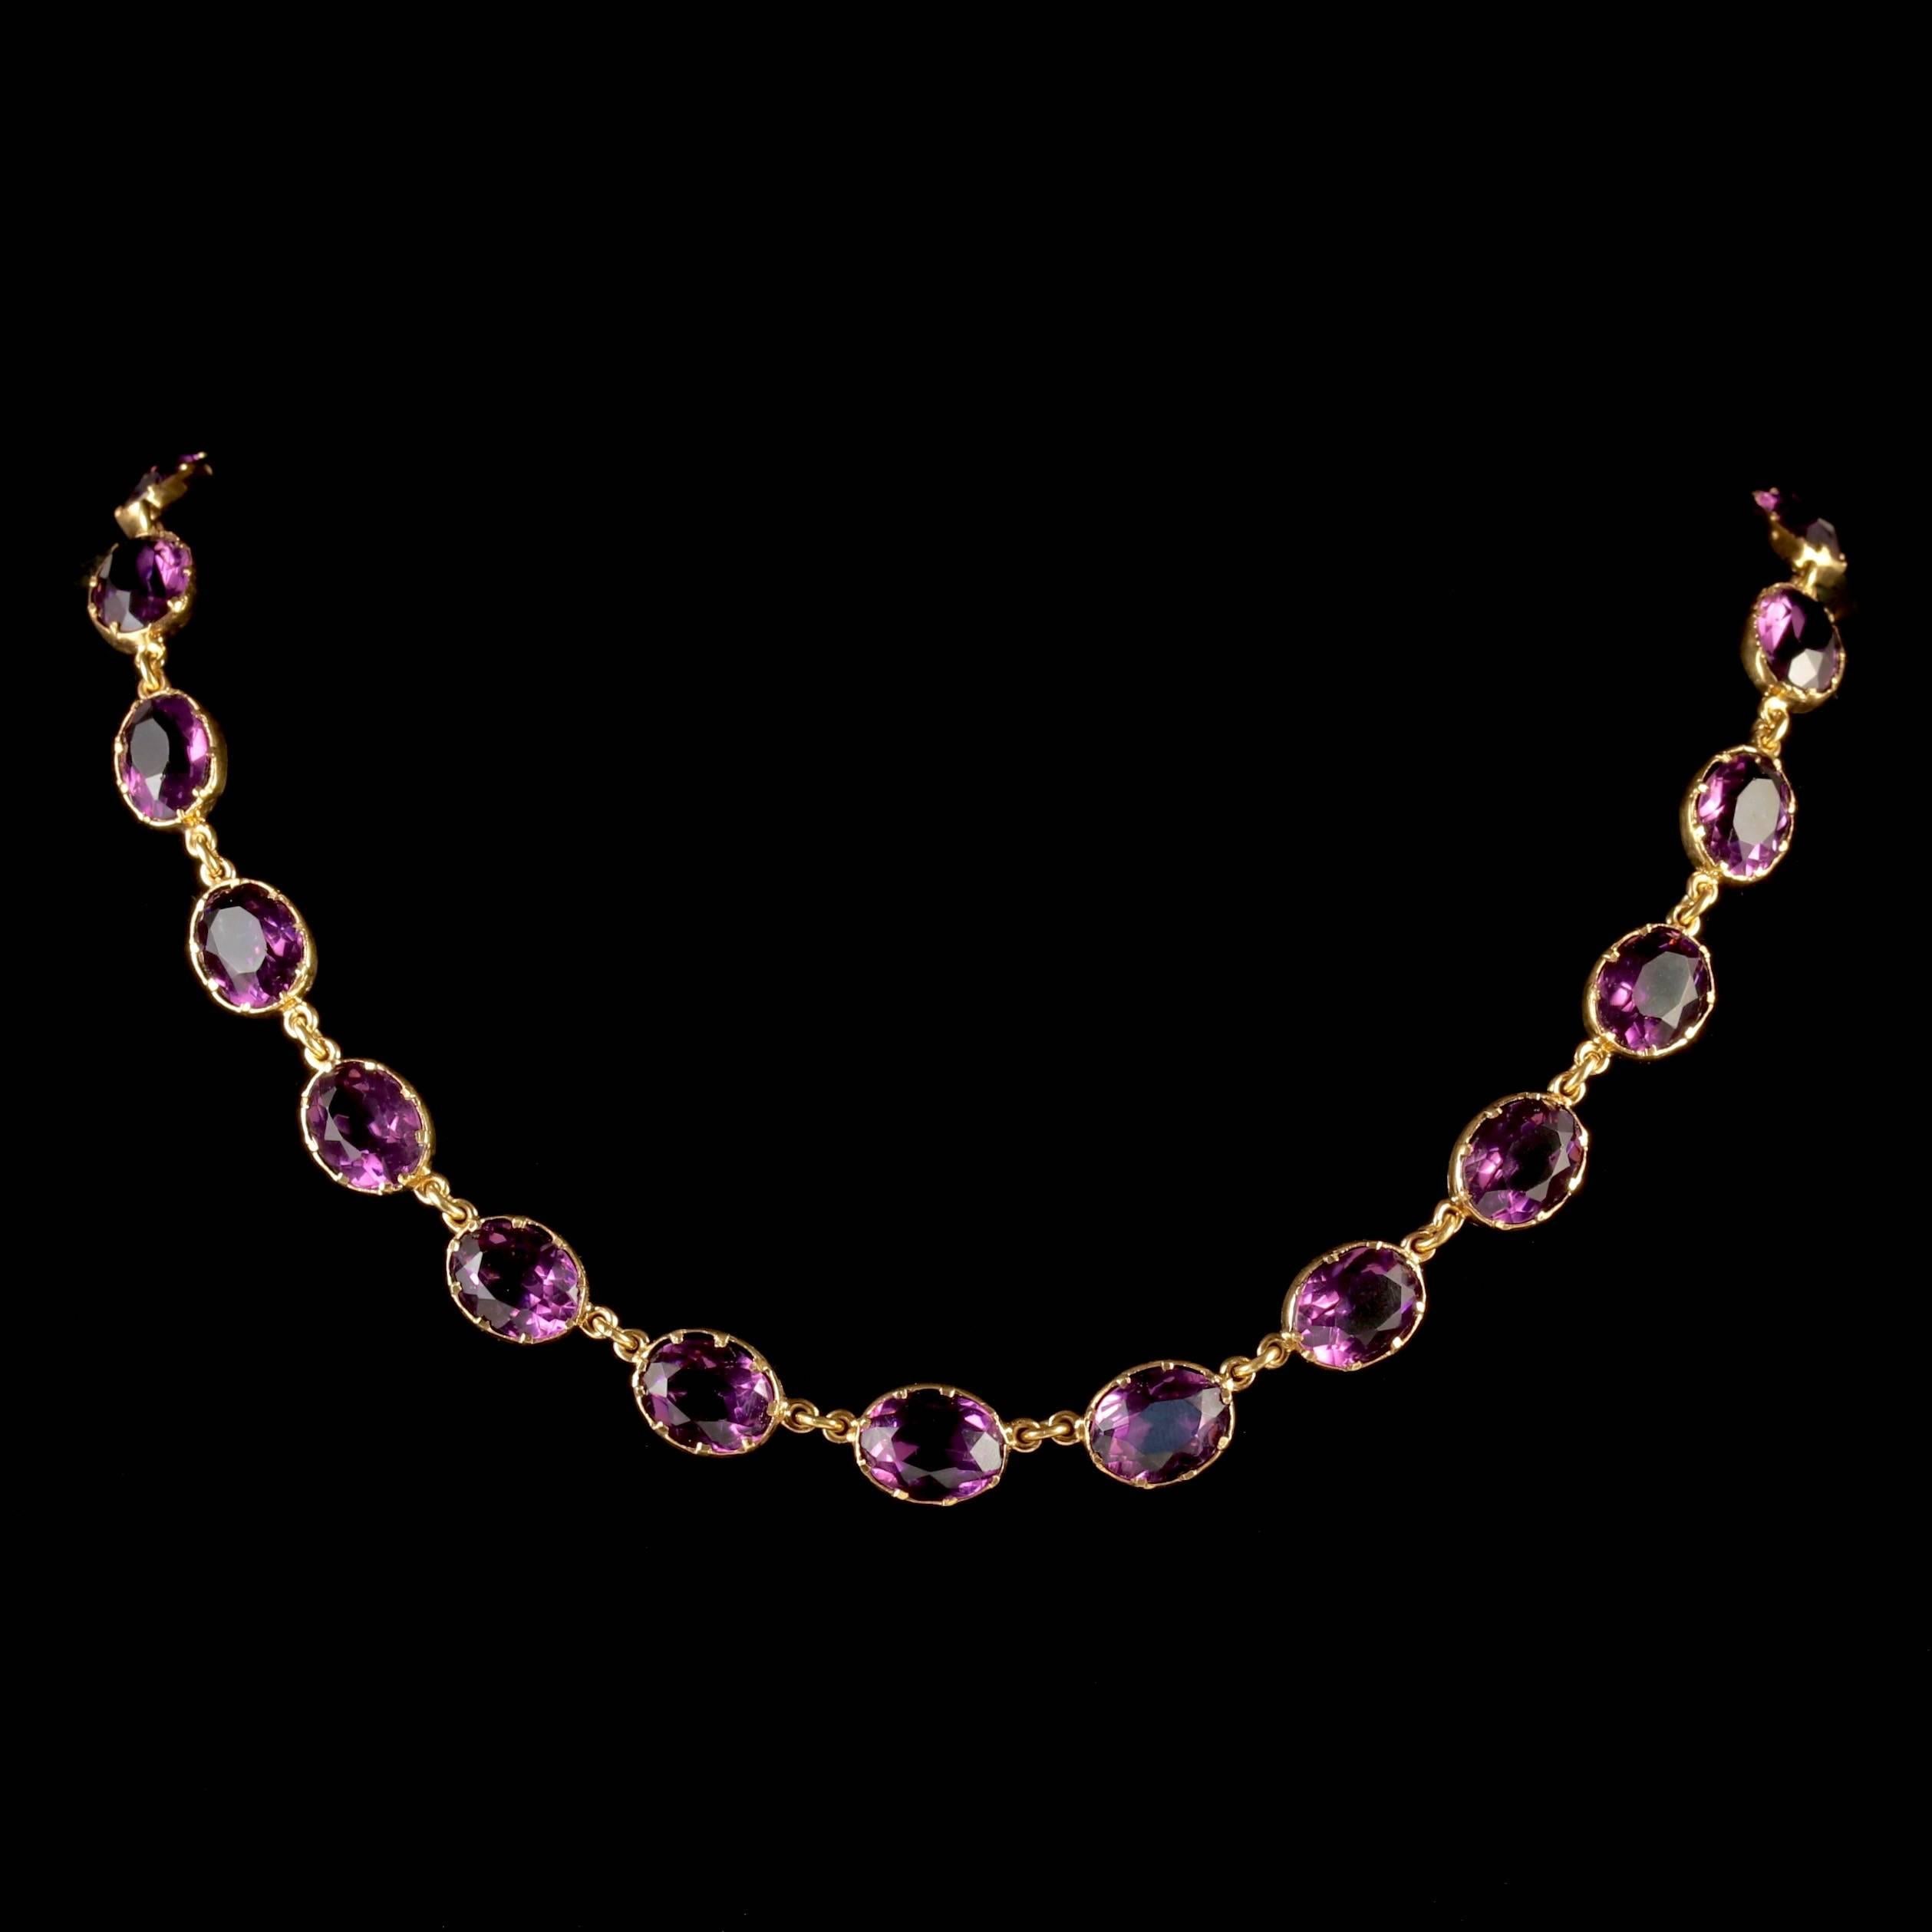 To read more please click continue reading below-

This fabulous antique Victorian 9ct Gold Purple Paste necklace is Circa 1880. 

The wonderful necklace is adorned with deep velvet rich purple Paste stones, all set in 9ct Gold which has developed a